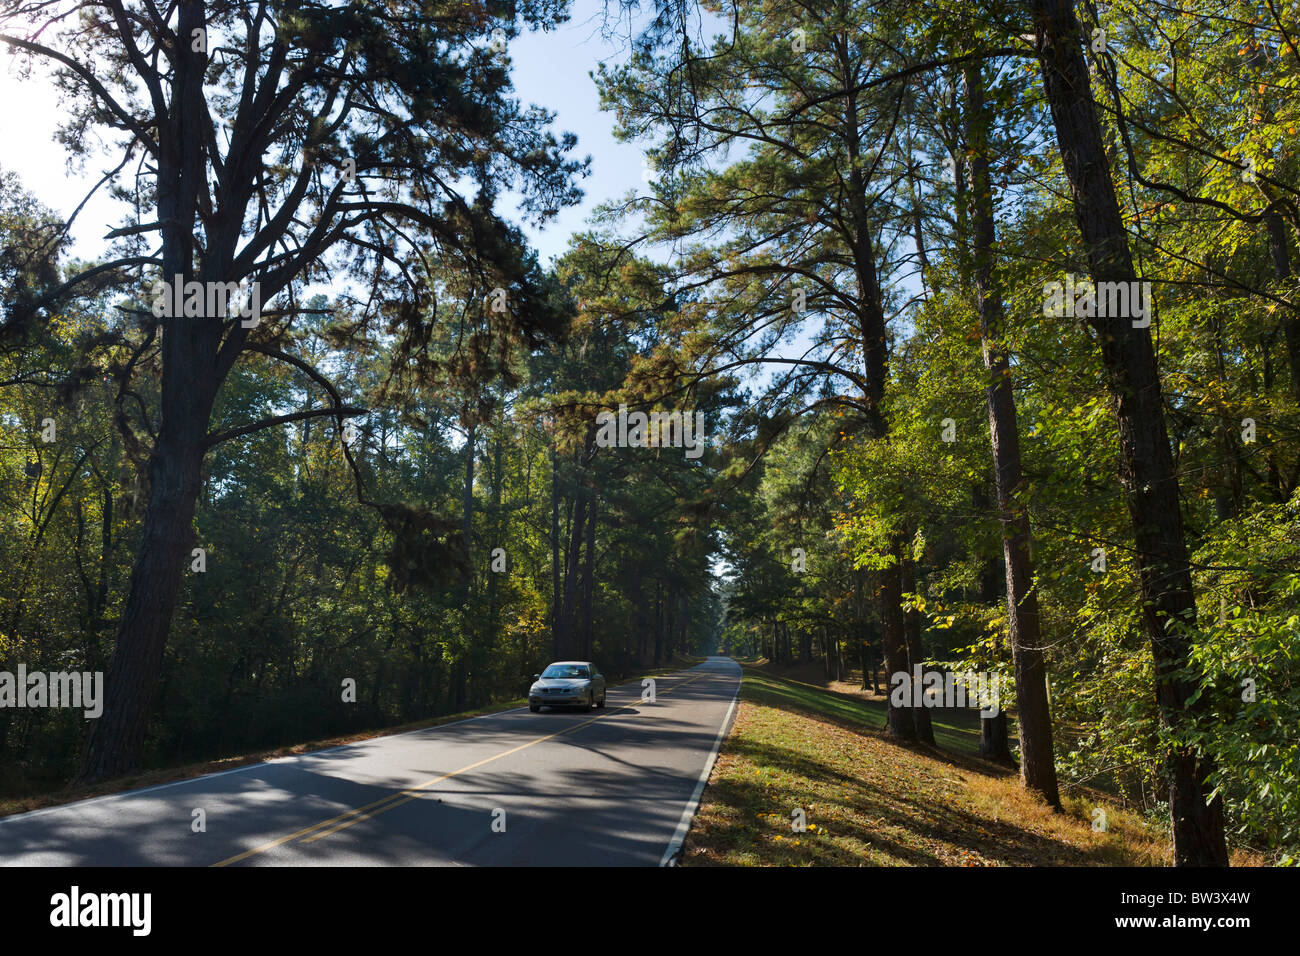 The Natchez Trace Parkway between Lorman and Natchez, Mississippi, USA Stock Photo